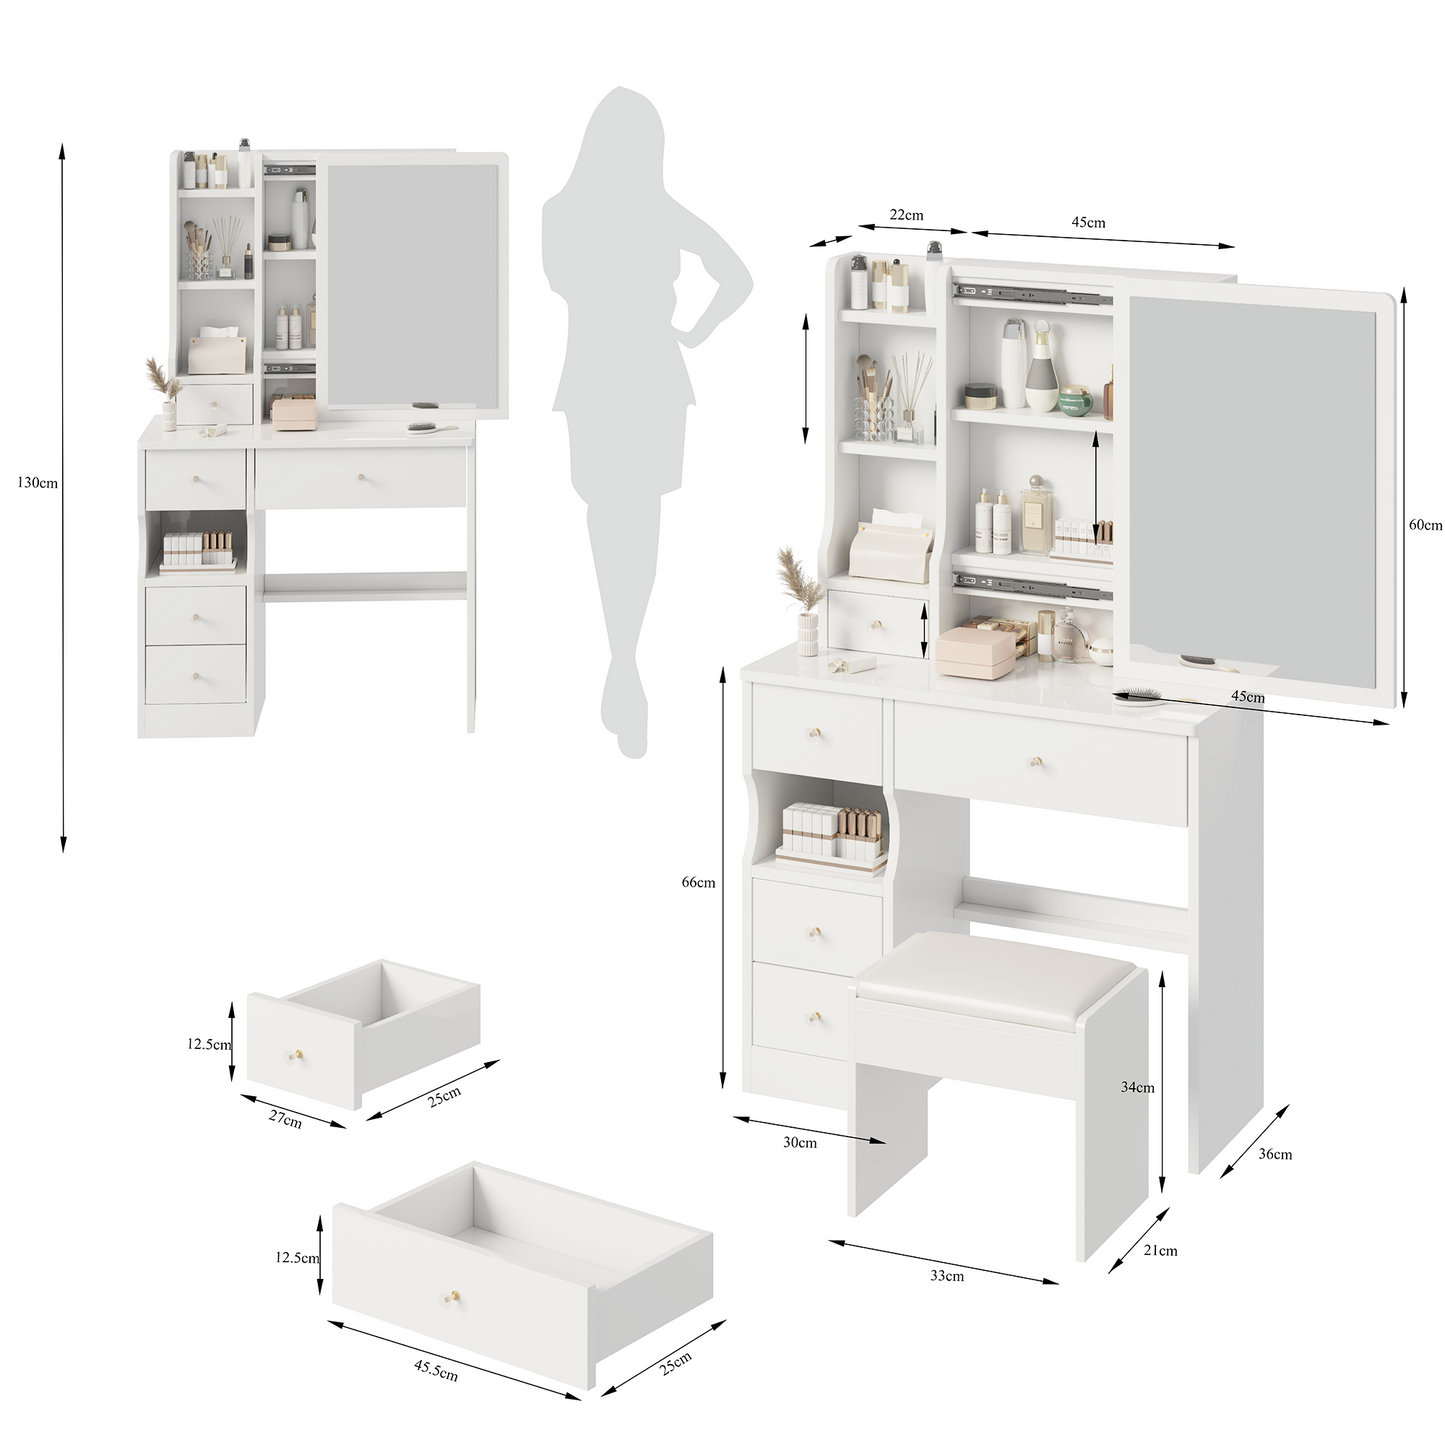 HSUNNS Makeup Vanity Table Set with Mirror, Modern 5 Drawers Dressing Desk with Cushion Stool and Storage Shelves, Vanity Desk with Right Sliding Mirror, Bedroom Vanities Set for Girls, White